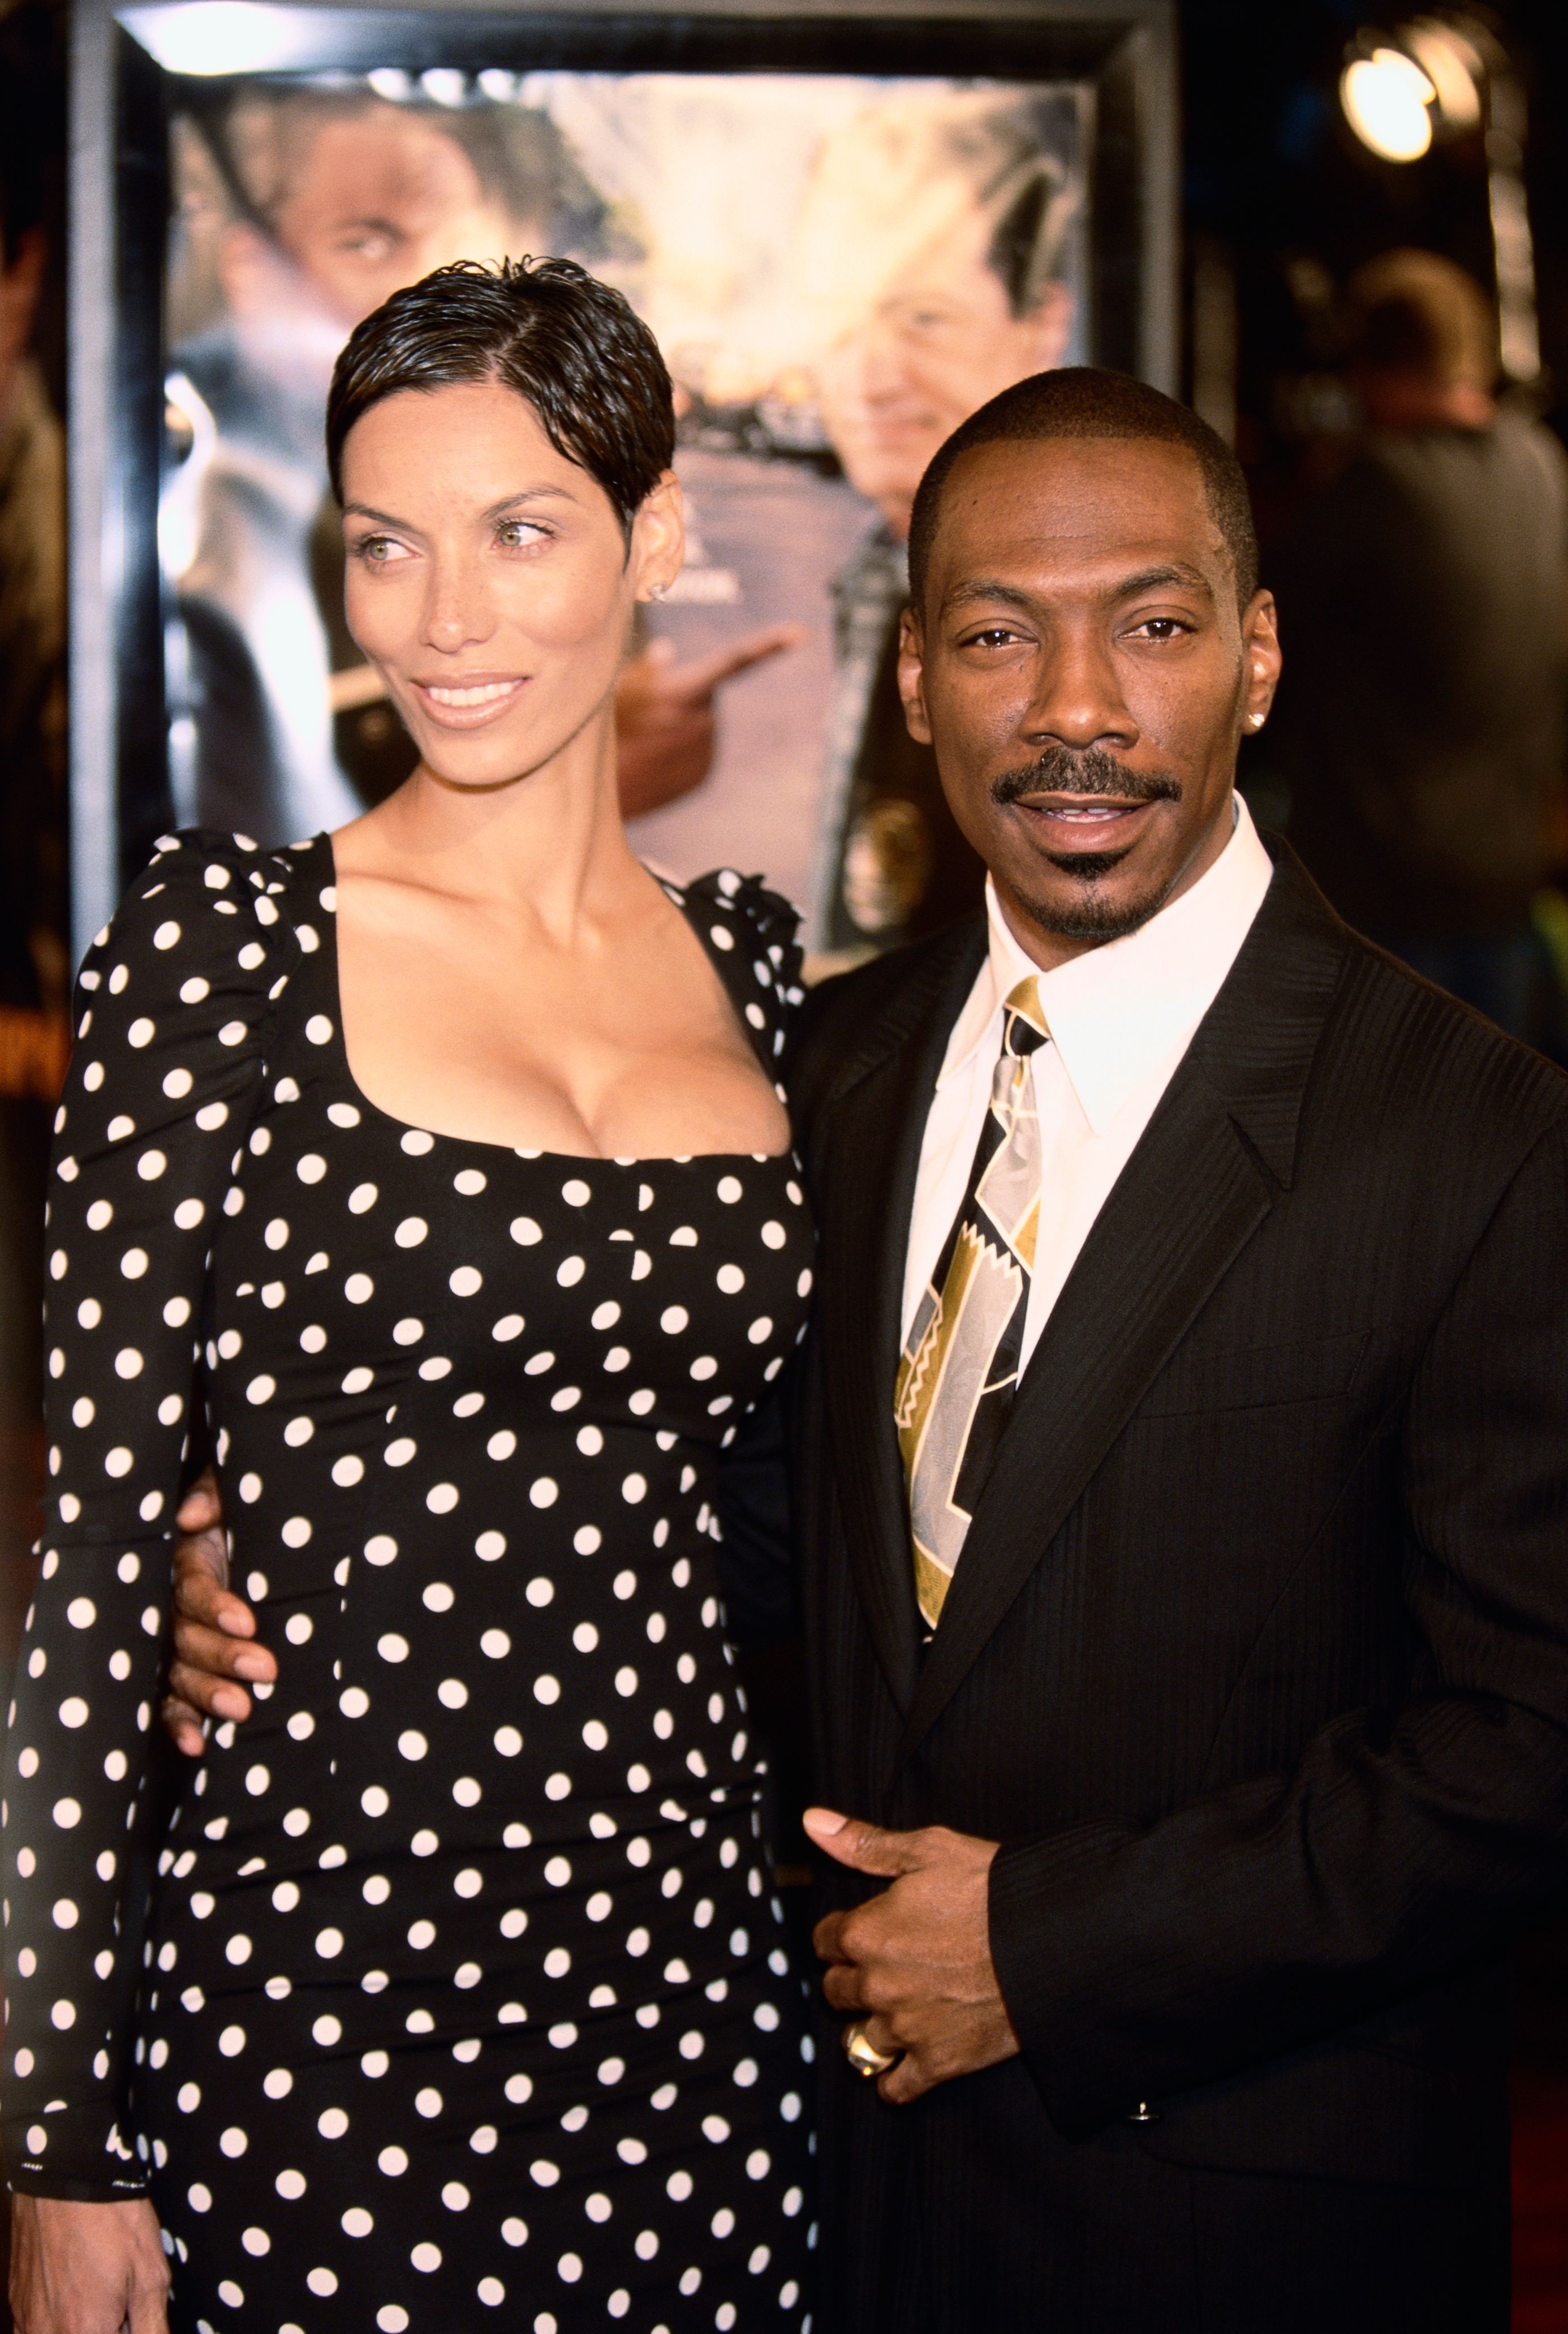 Eddie and Nicole Murphy attend the Showtime Premiere at Grauman's Chinese Theatre in Hollywood, California. | Source: Getty Images